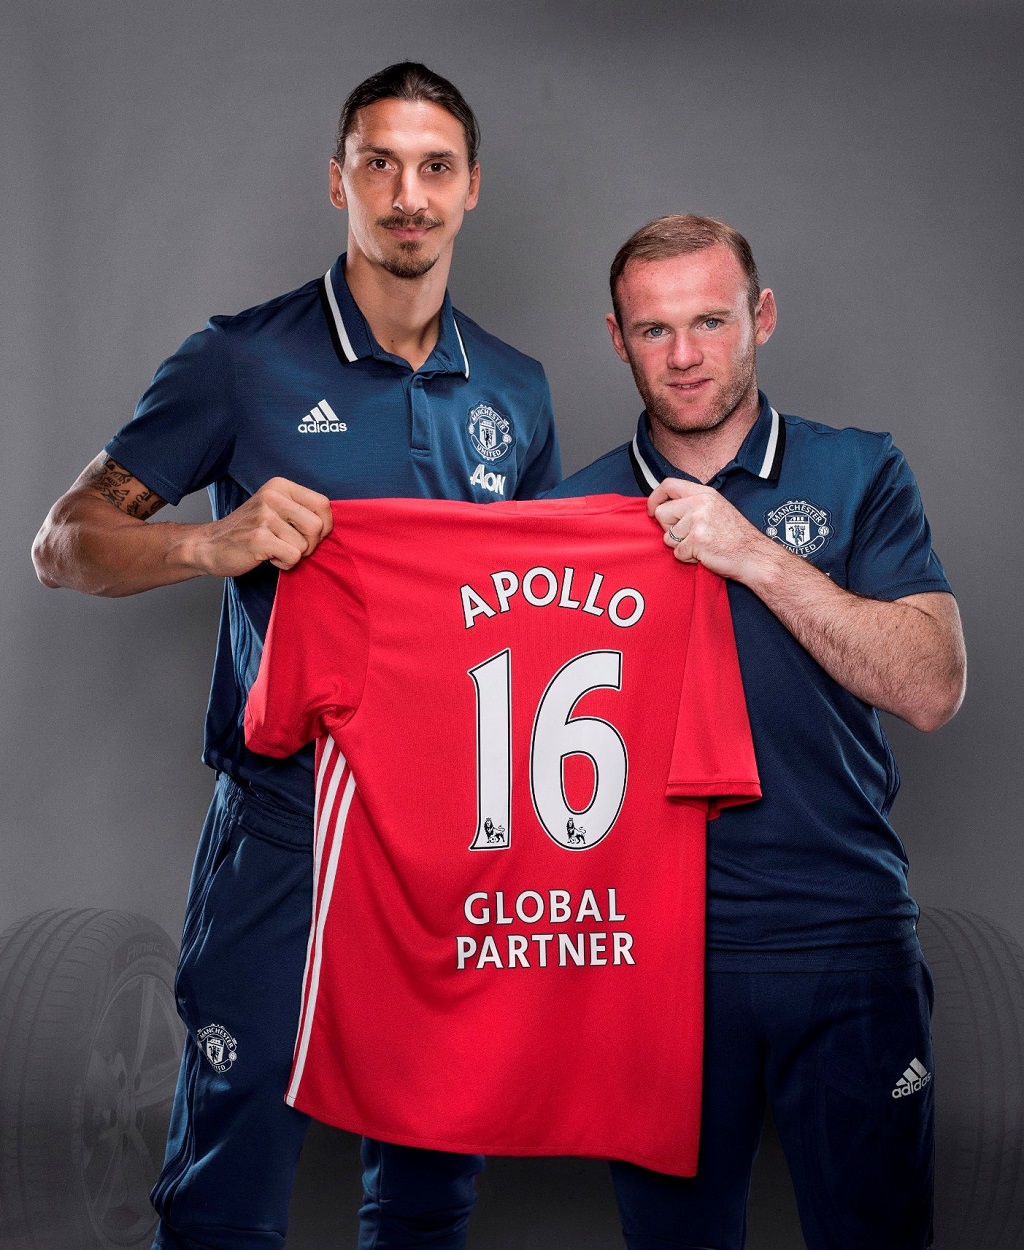 zlatan-ibrahimovic-and-wayne-rooney-apollo-tyres-is-now-the-global-tyre-partner-for-manchester-united